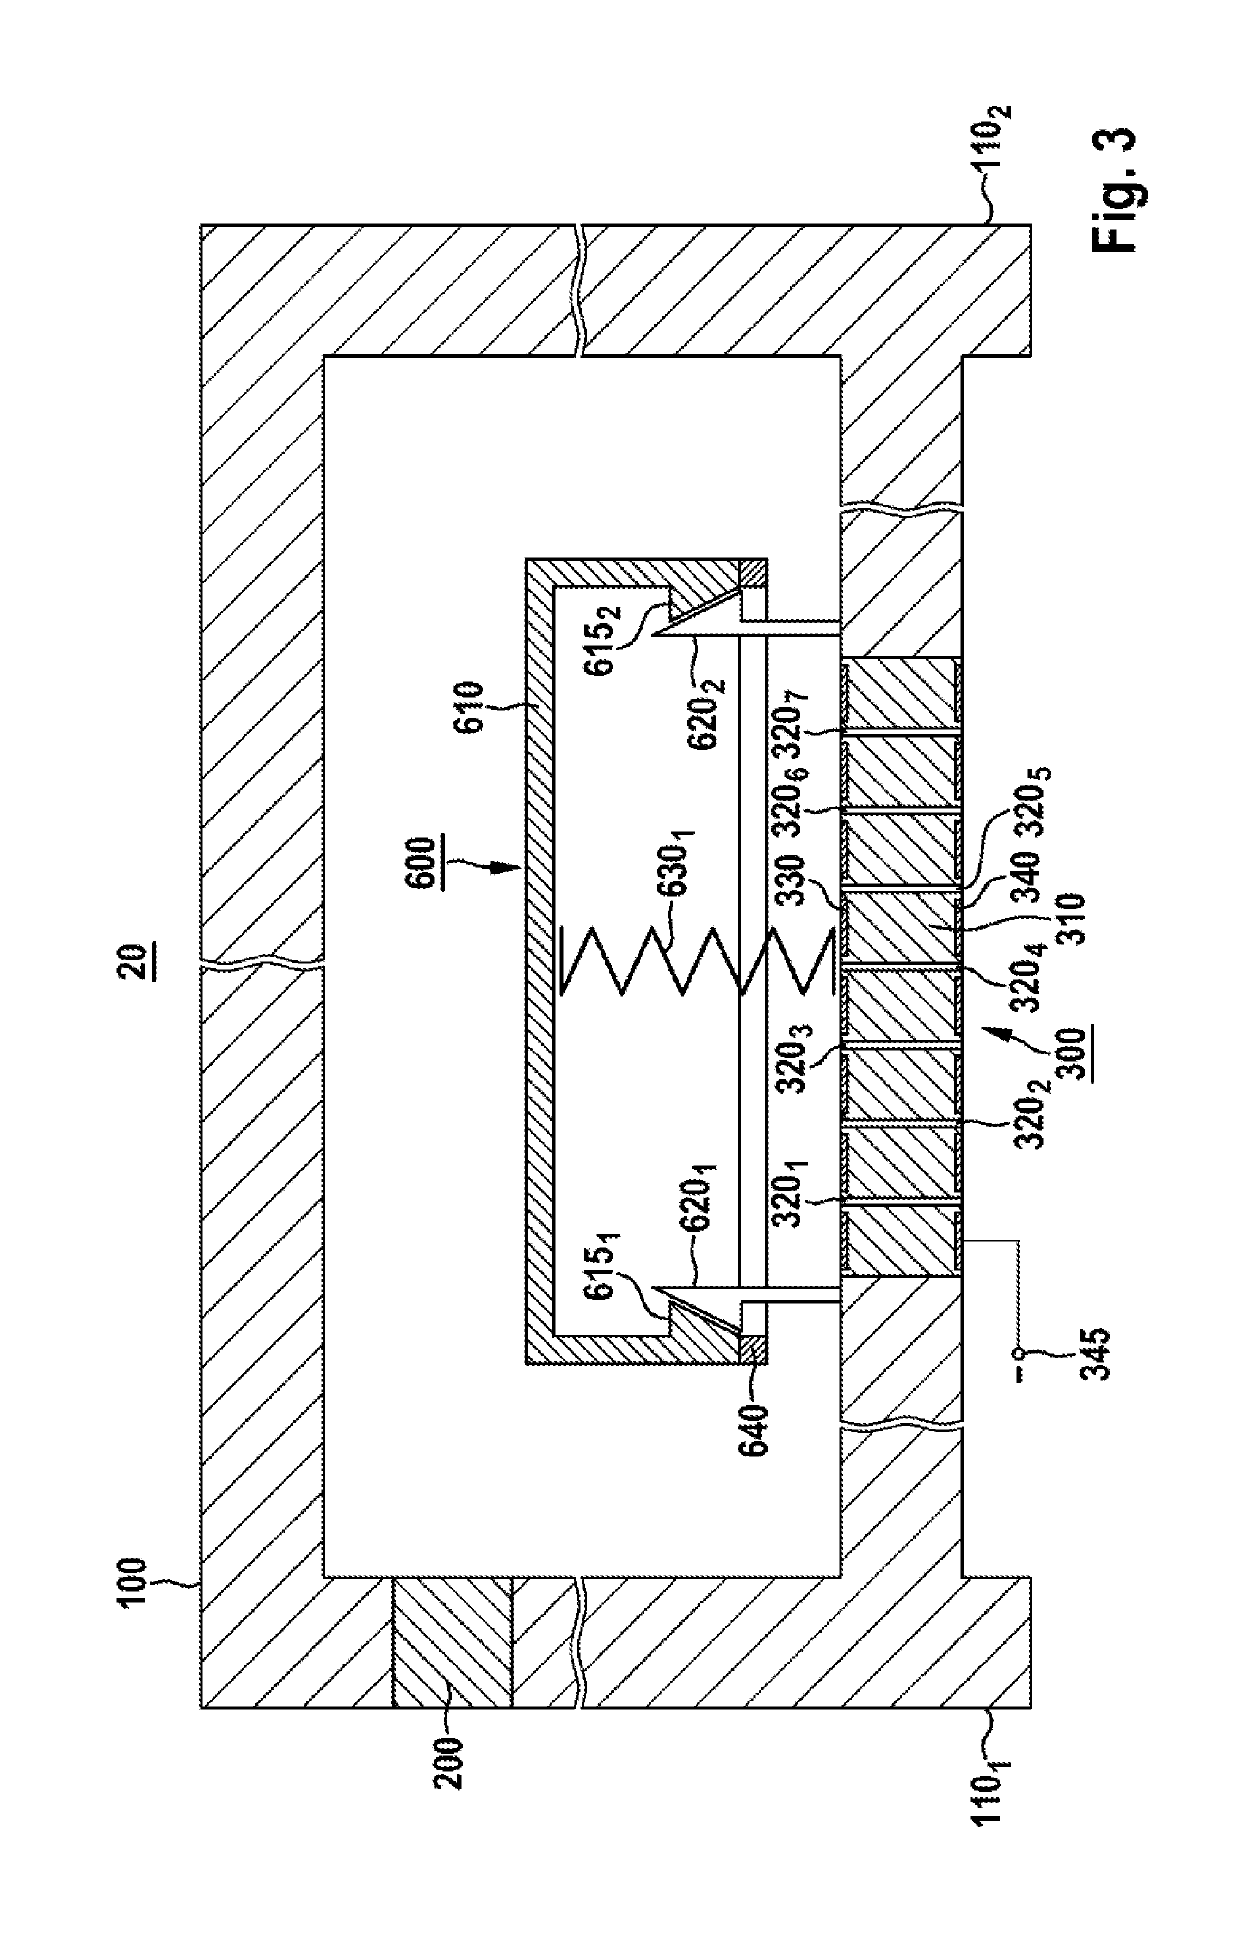 Device and method for removing moisture from a battery housing